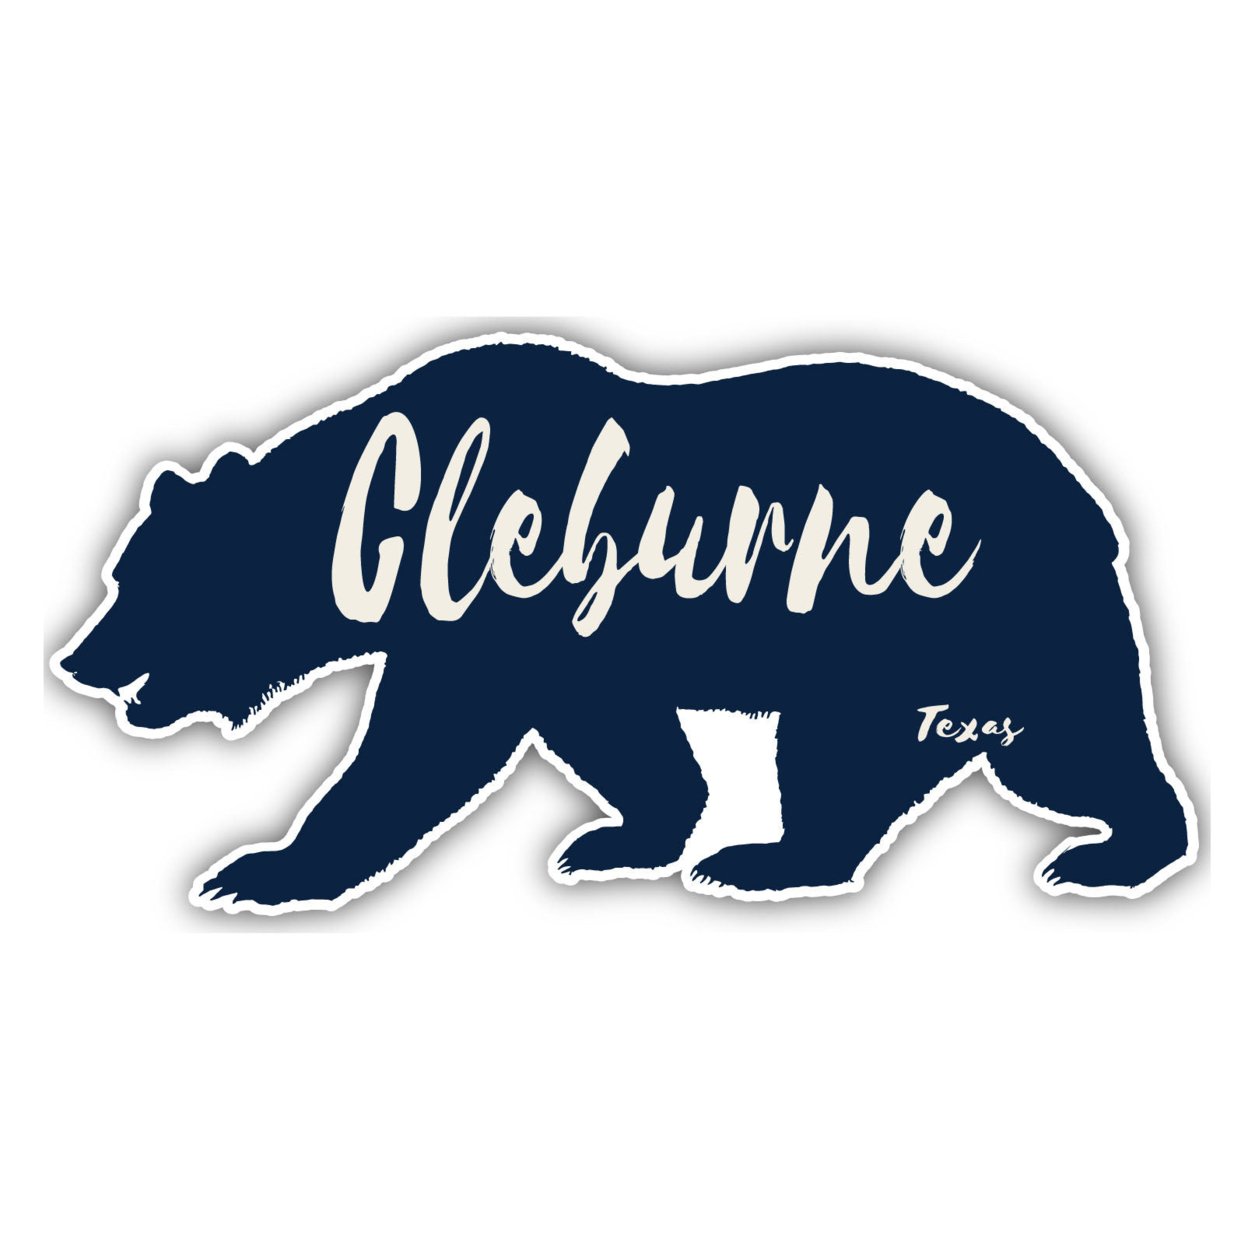 Cleburne Texas Souvenir Decorative Stickers (Choose Theme And Size) - 4-Pack, 2-Inch, Bear